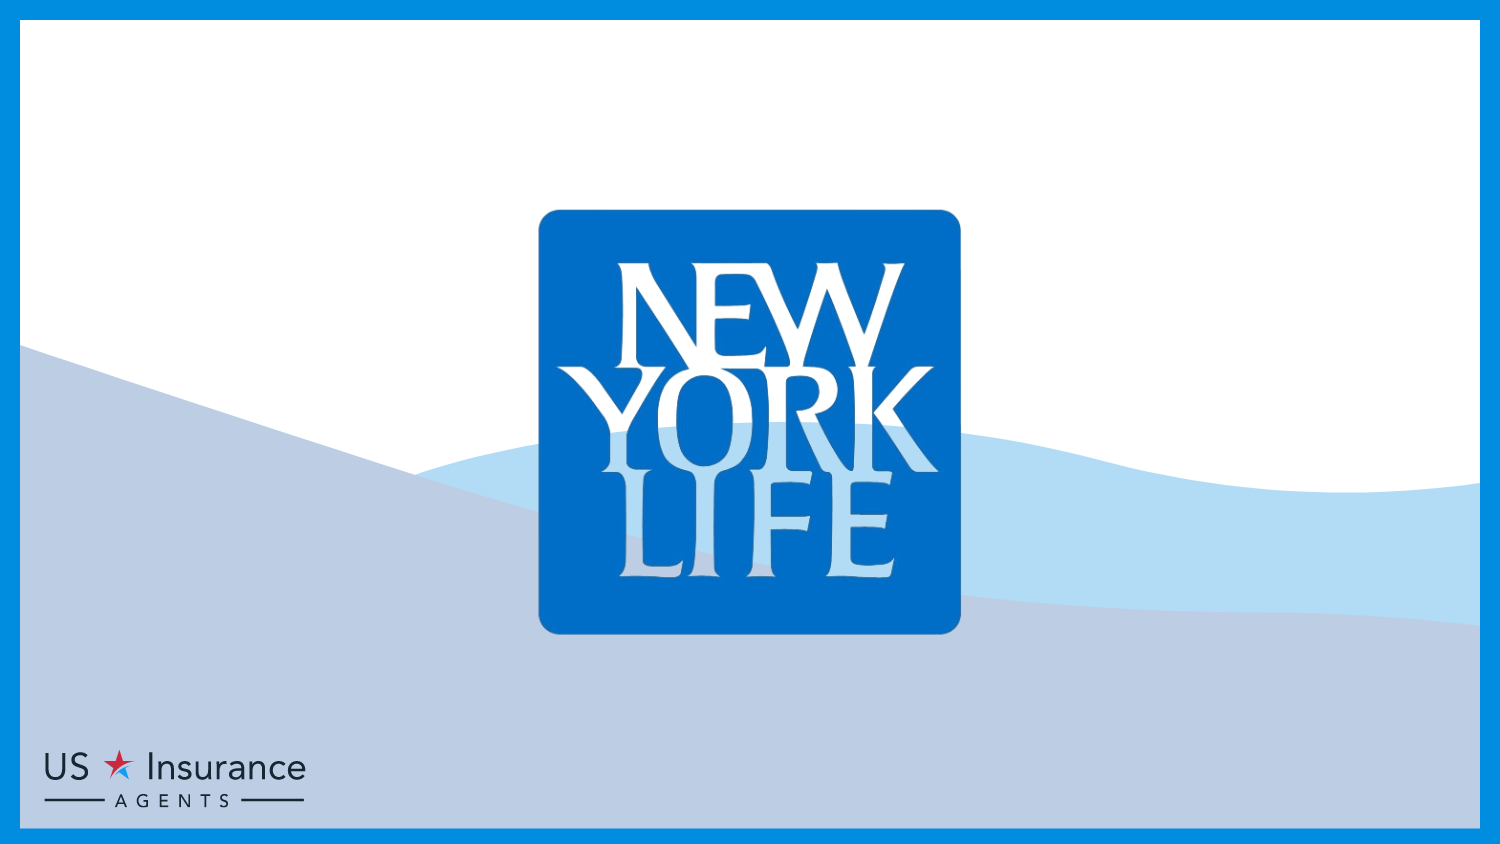 New York Life: Best Life Insurance for People With Cystic Fibrosis